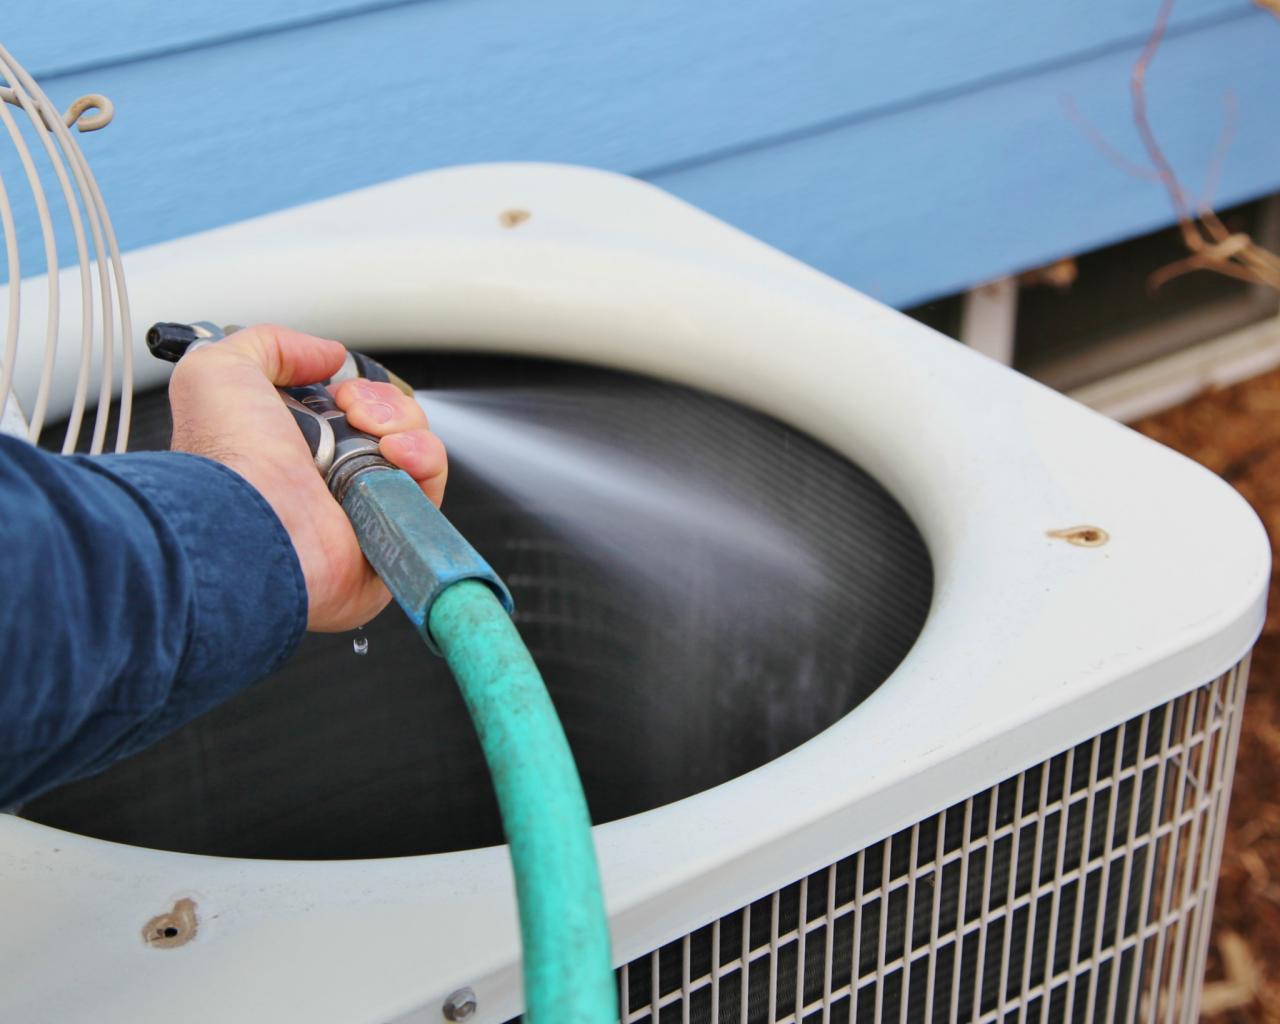 Check Out This Article On Hvac That Offers Many Great Tips